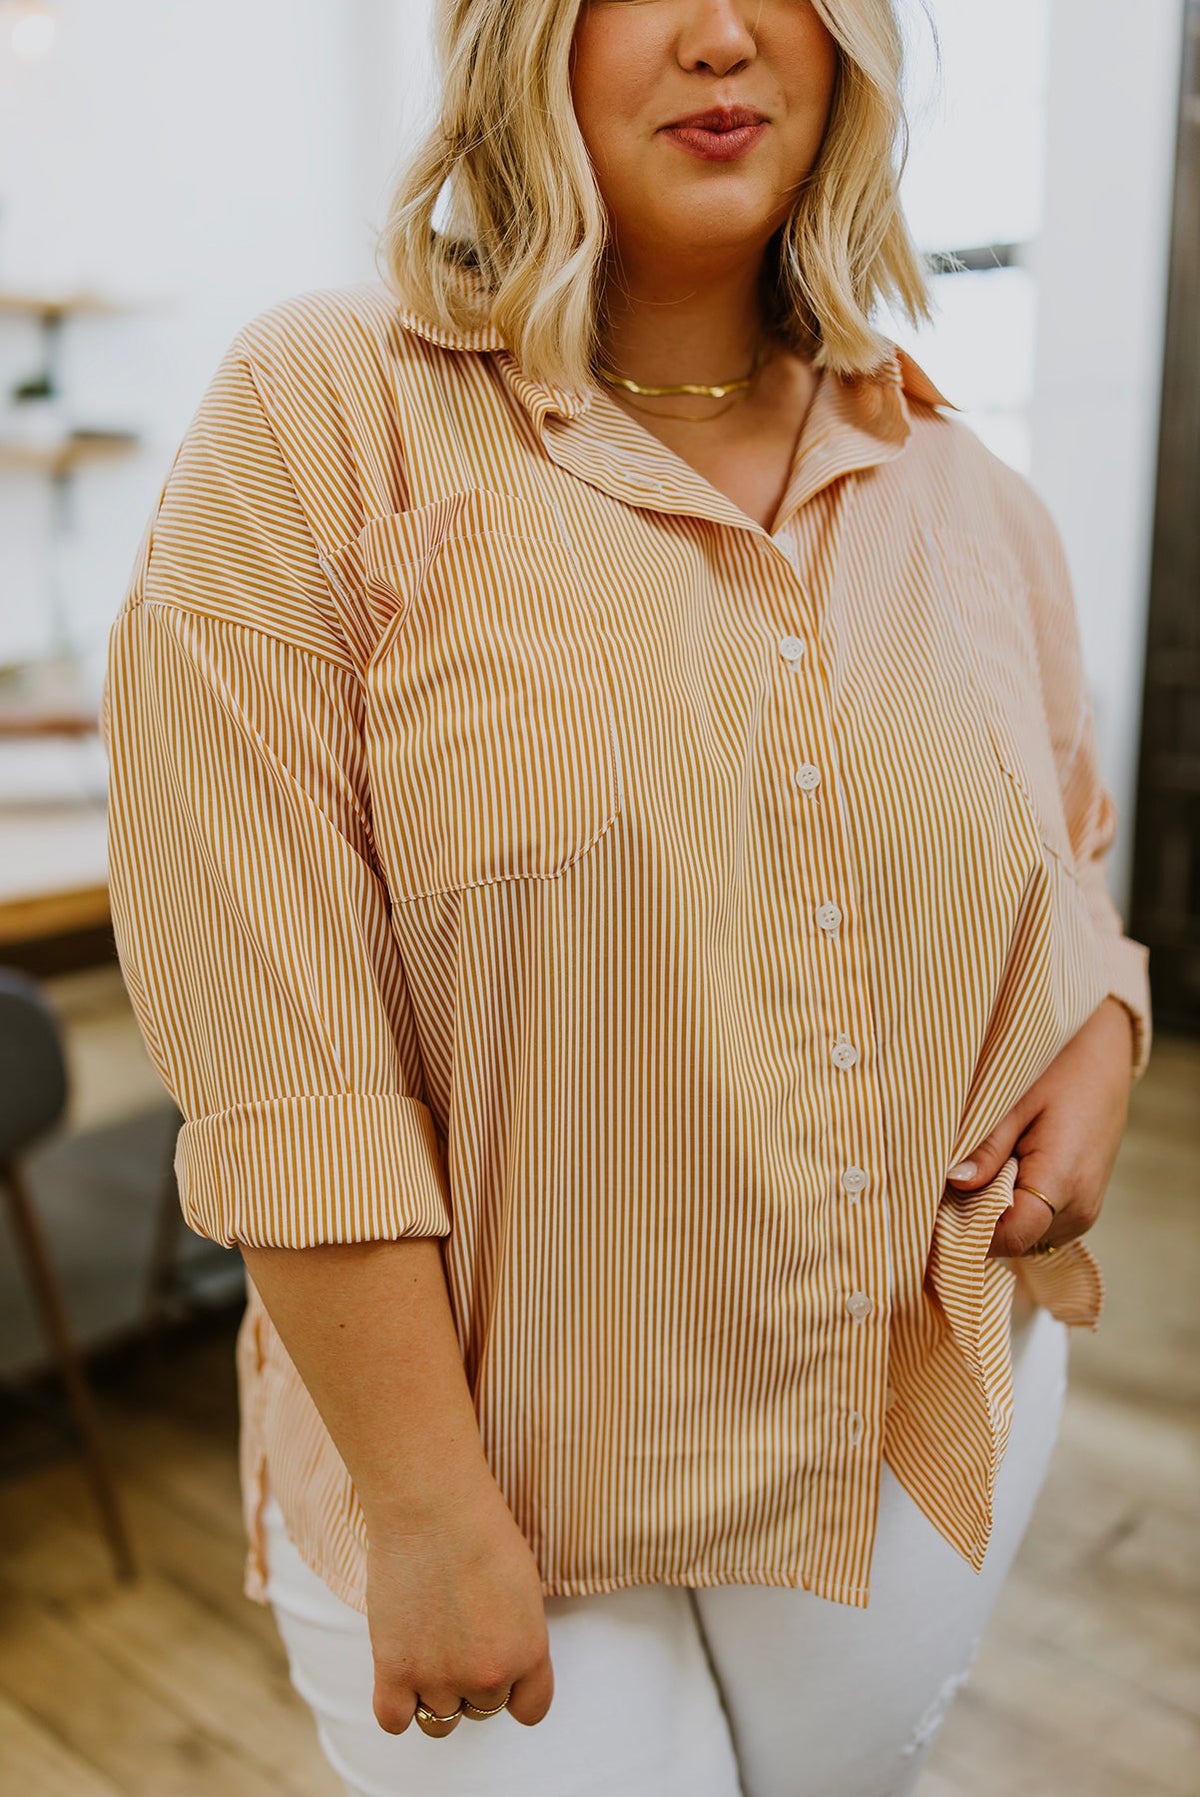 Easy On The Eyes Striped Button Up Top